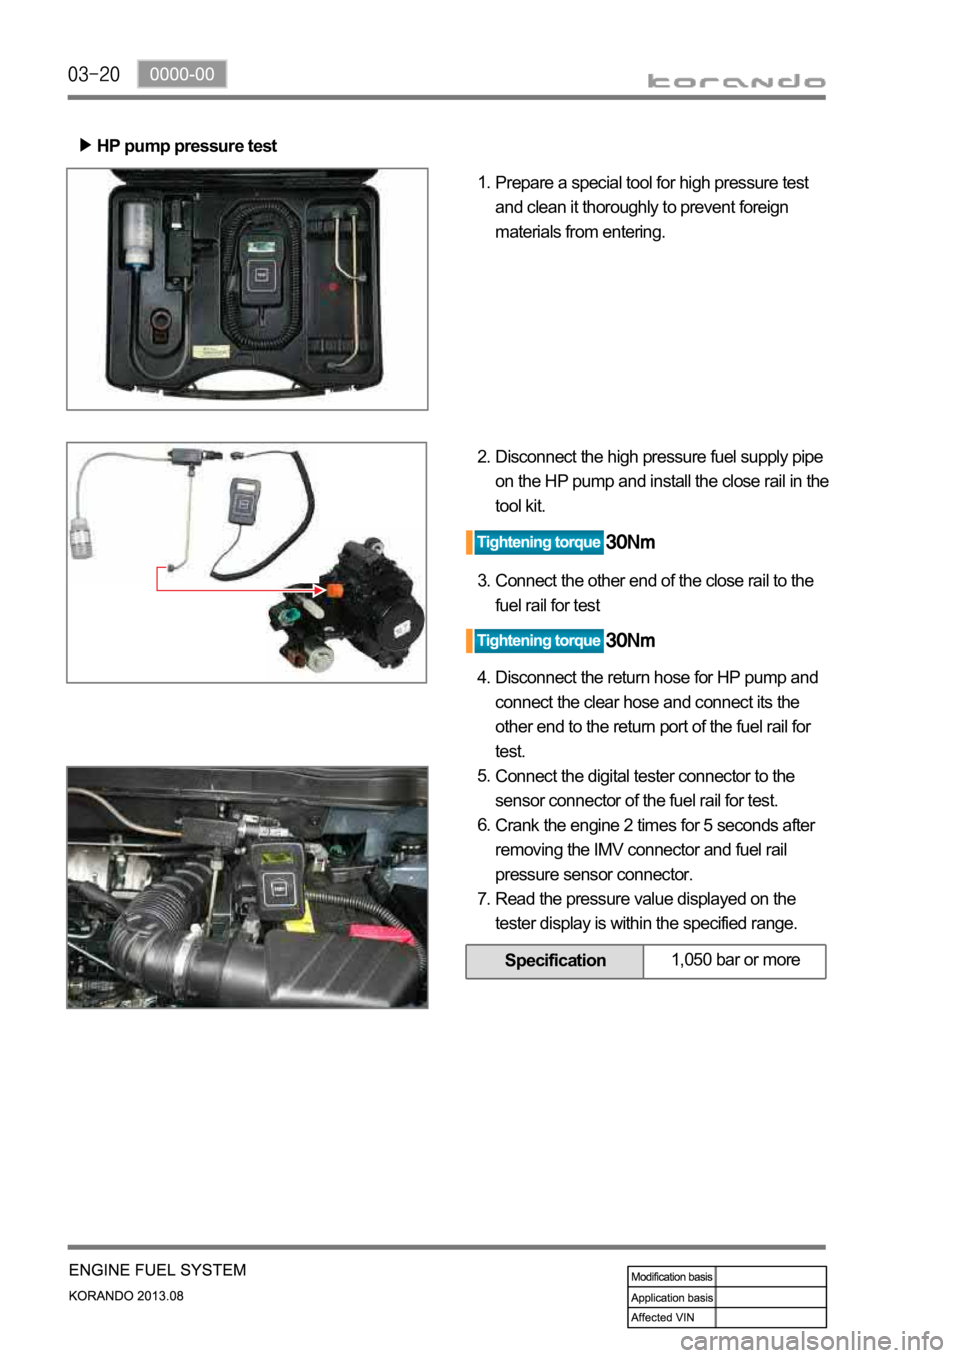 SSANGYONG KORANDO 2013  Service Manual HP pump pressure test
Prepare a special tool for high pressure test 
and clean it thoroughly to prevent foreign 
materials from entering. 1.
Disconnect the high pressure fuel supply pipe 
on the HP pu